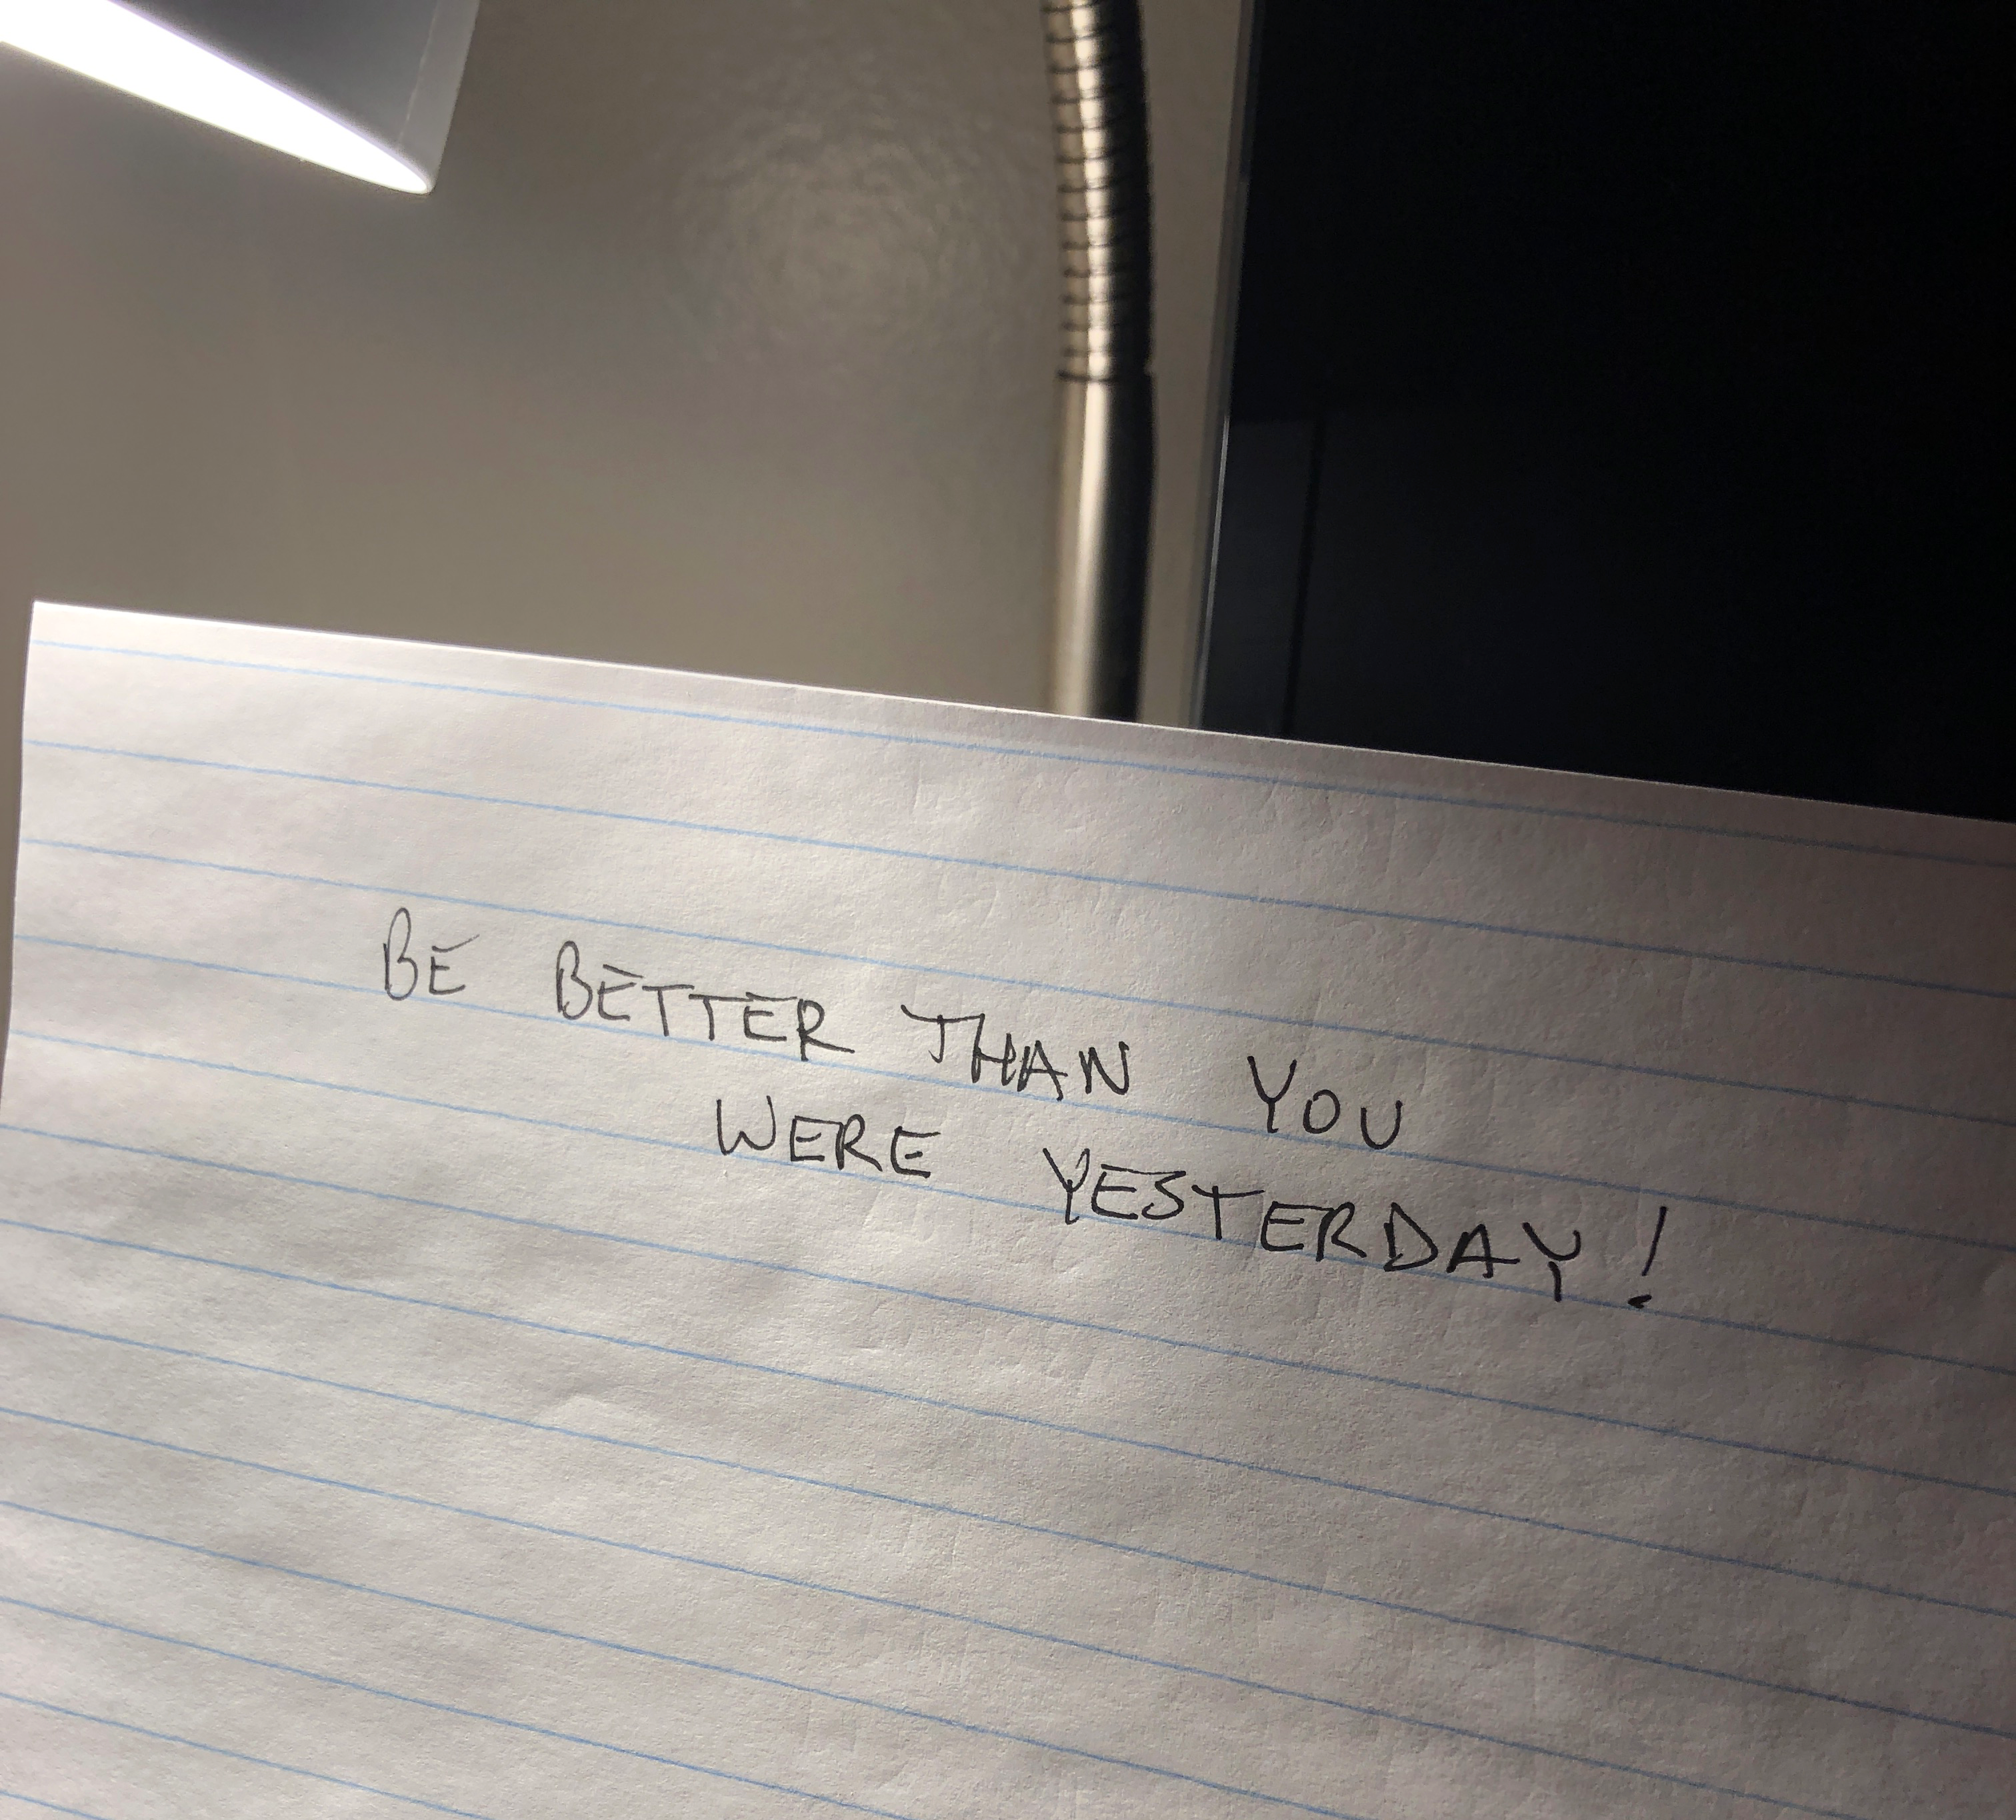 A piece of paper on my side table that reads, 'Be better than you were yesterday'.